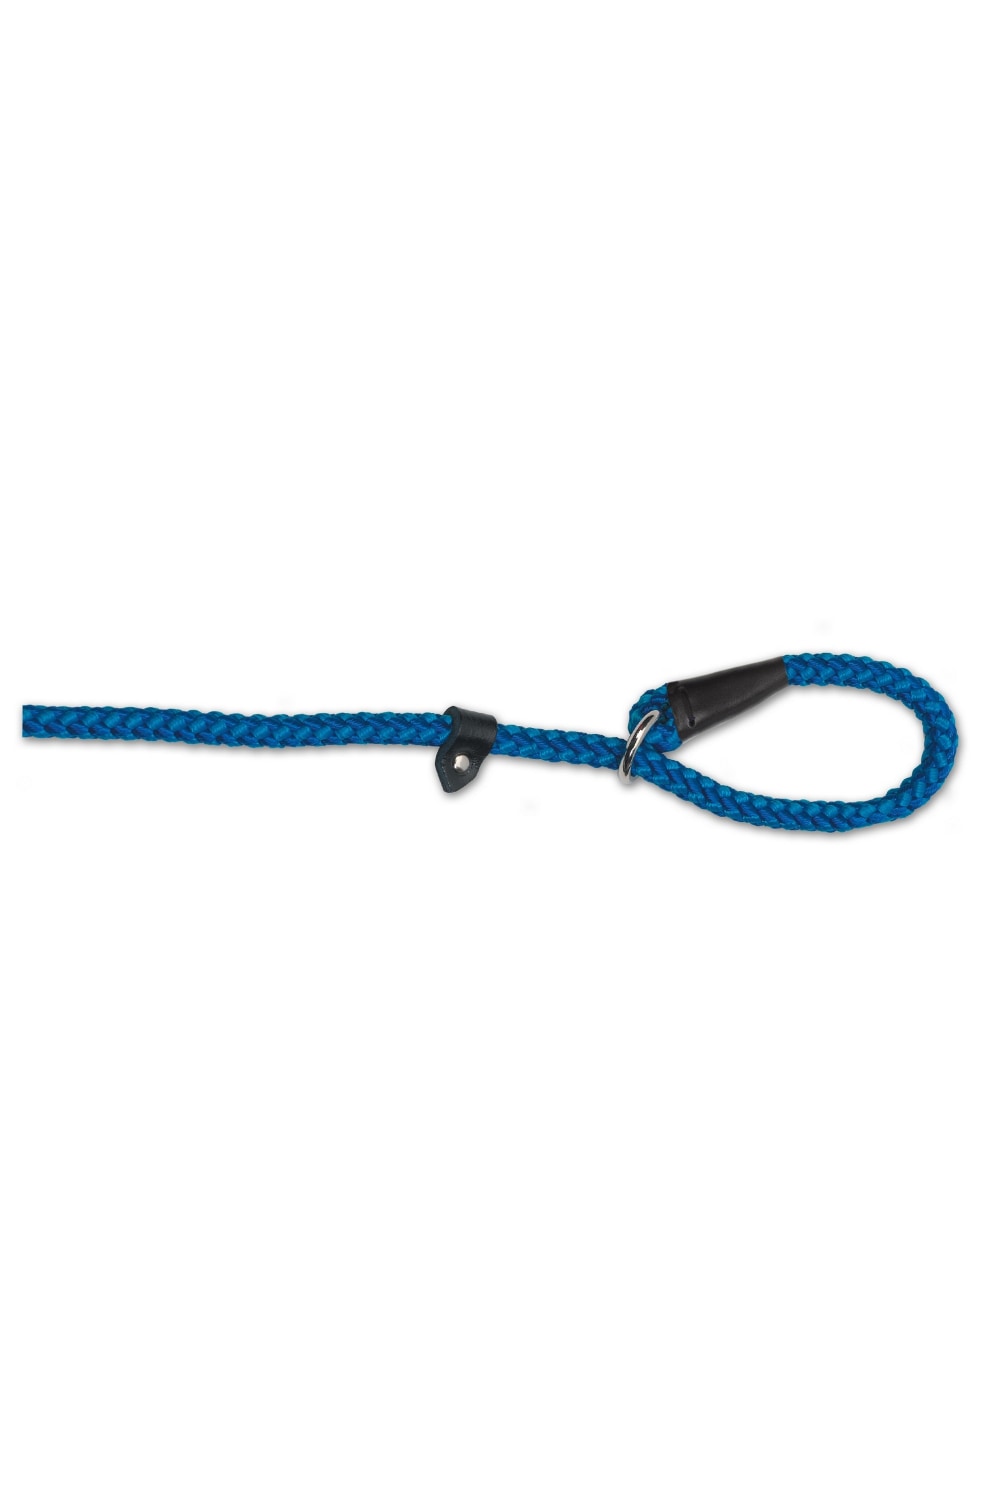 Ancol Pet Products Heritage Rope Dog Slip Lead (Blue) (0.4in x 1.2m)